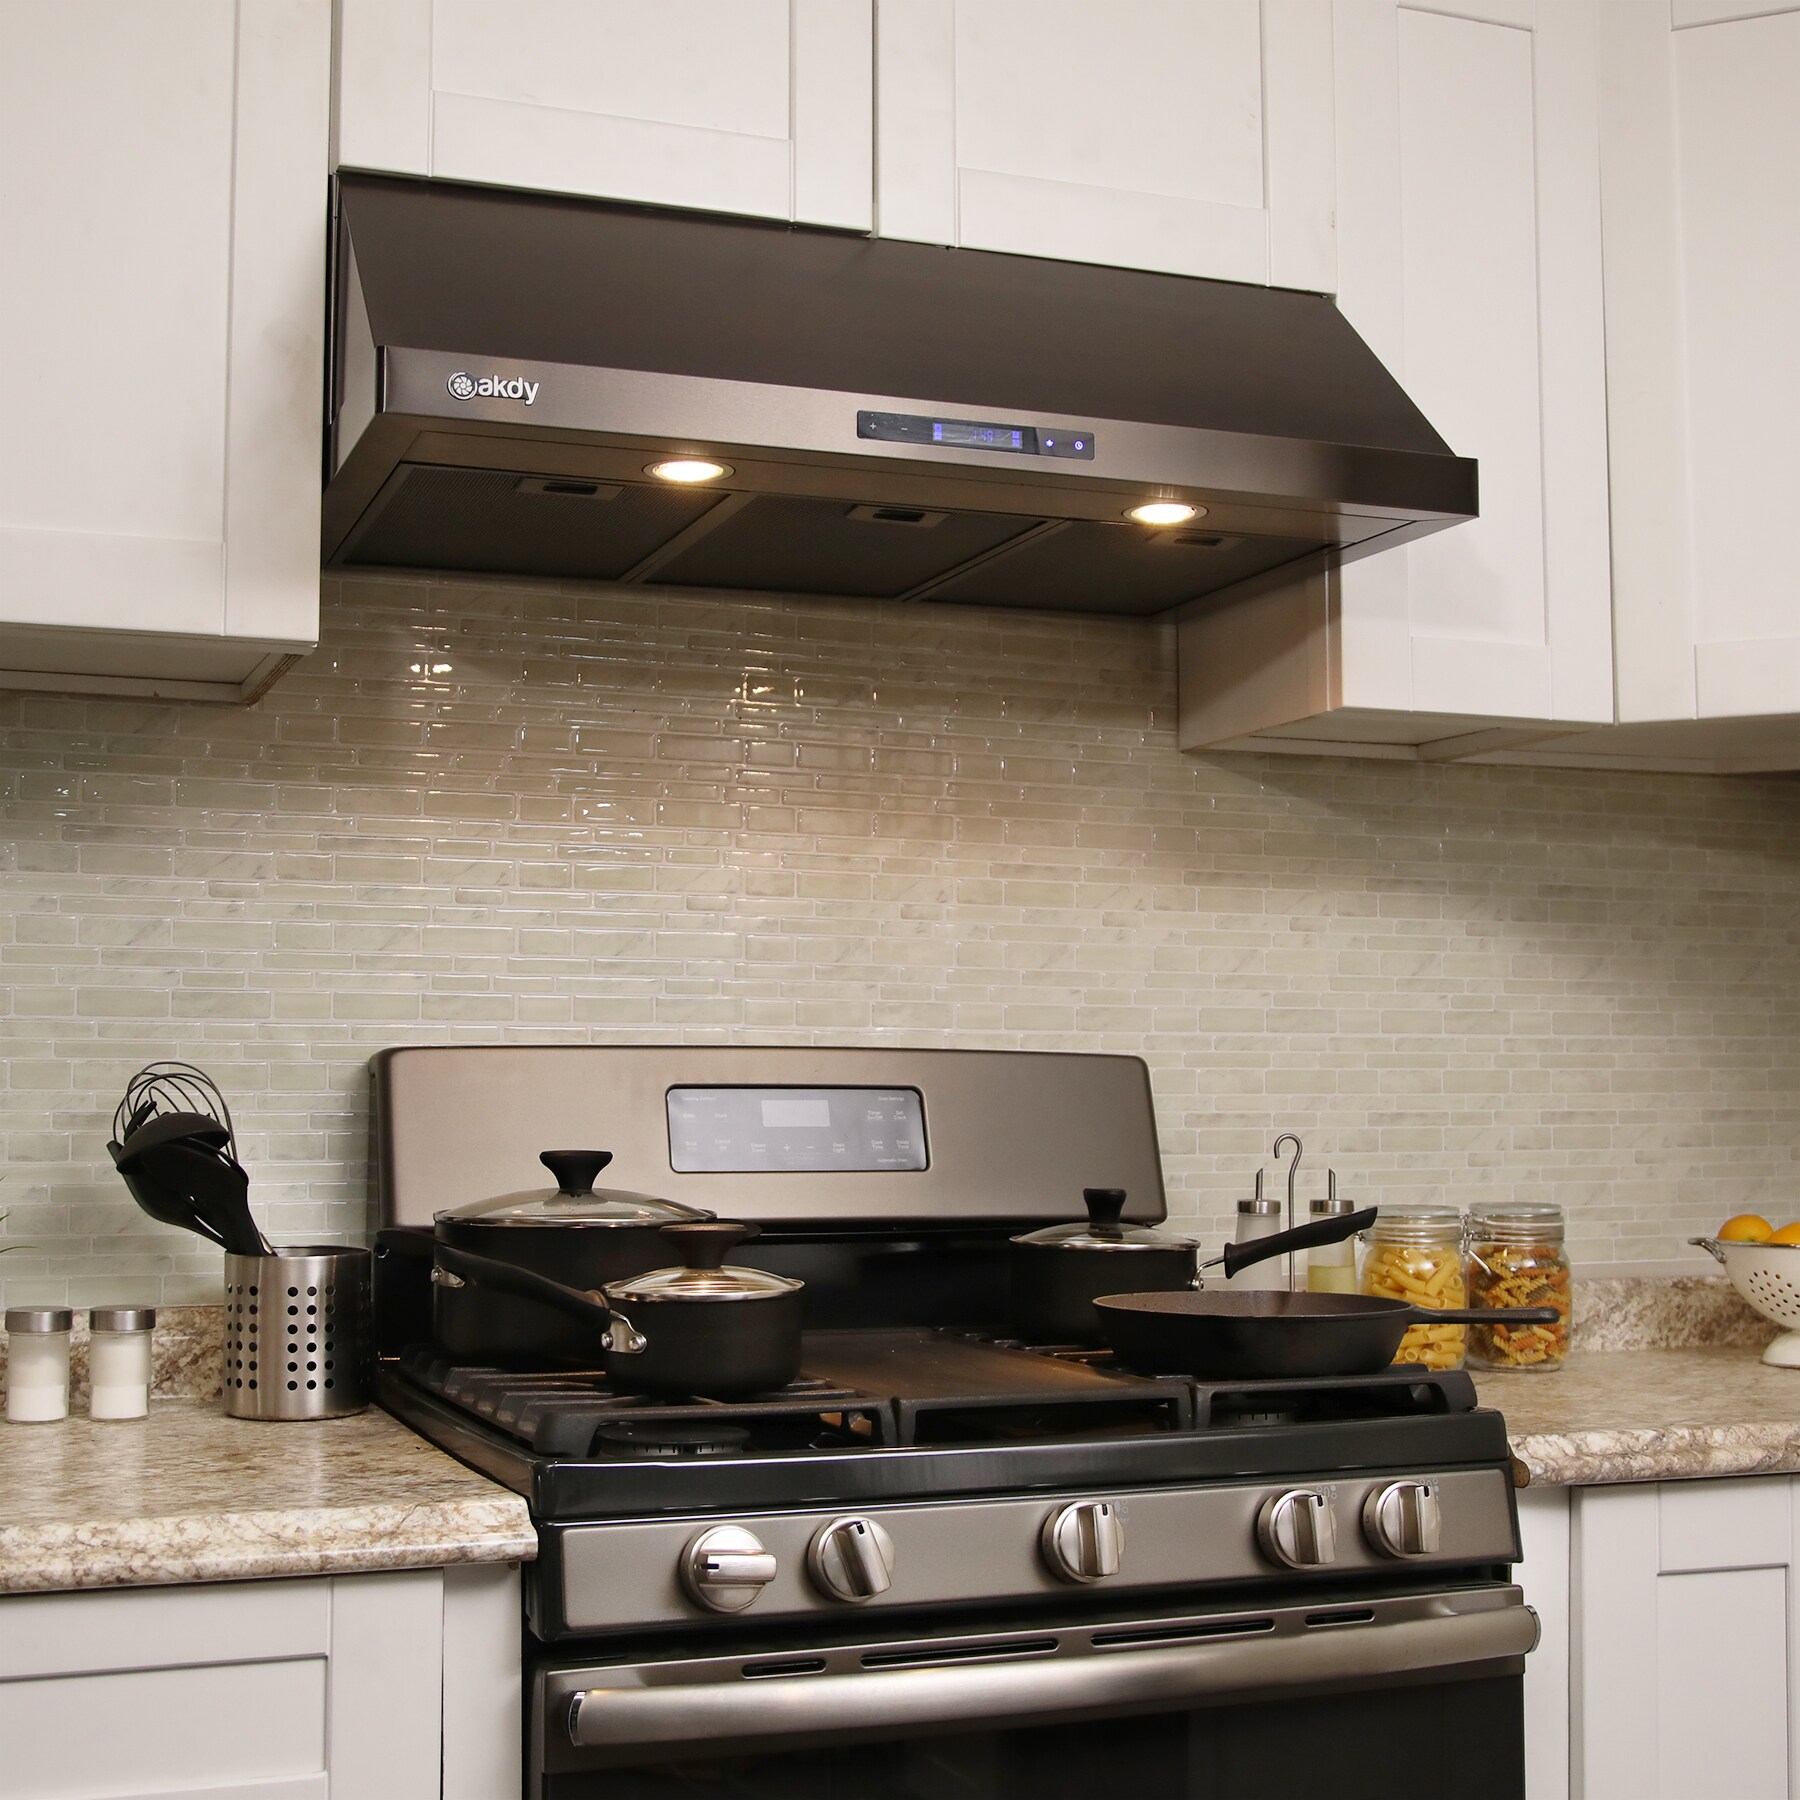 343 CFM Ducted Under Cabinet Range Hood in Black Stainless Steel with LED Lights AKDY 30 in 